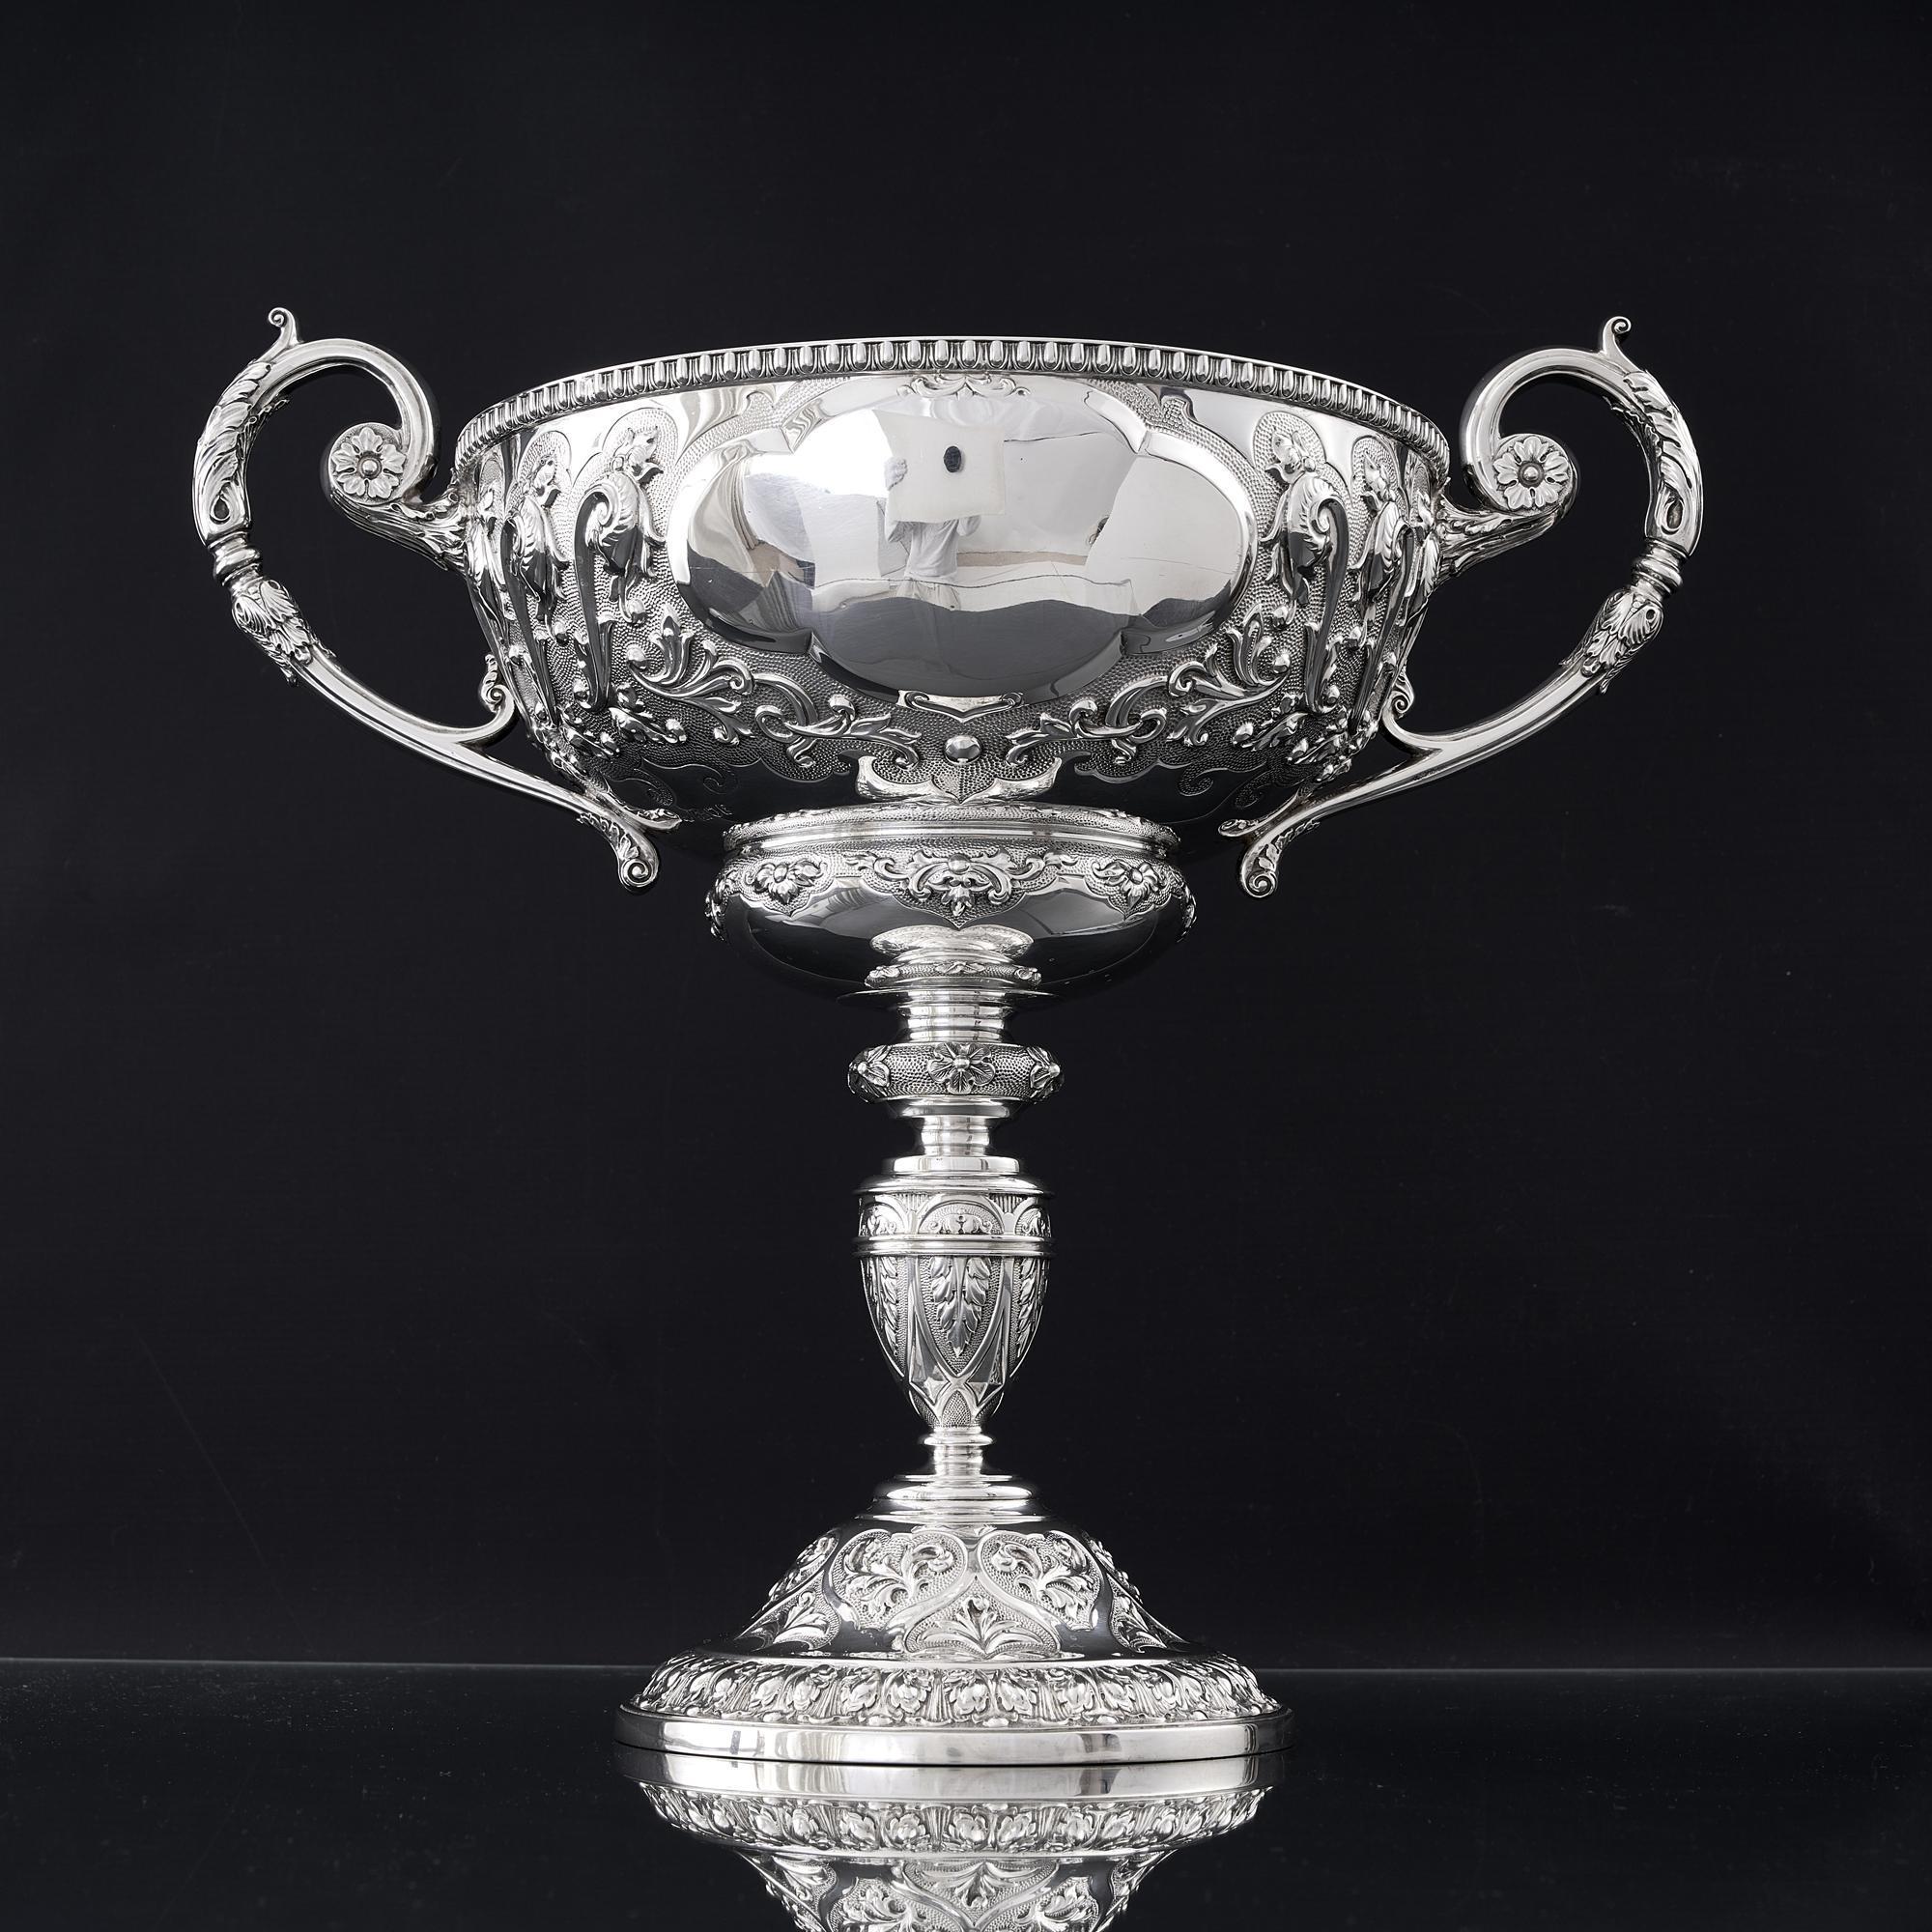 A magnificent late Victorian period antique sterling silver trophy. The wide shallow bowl, stem and base are all hand chased in high relief with various scrolling foliage and acanthus leaves set against a mottled background. The rim and base feature